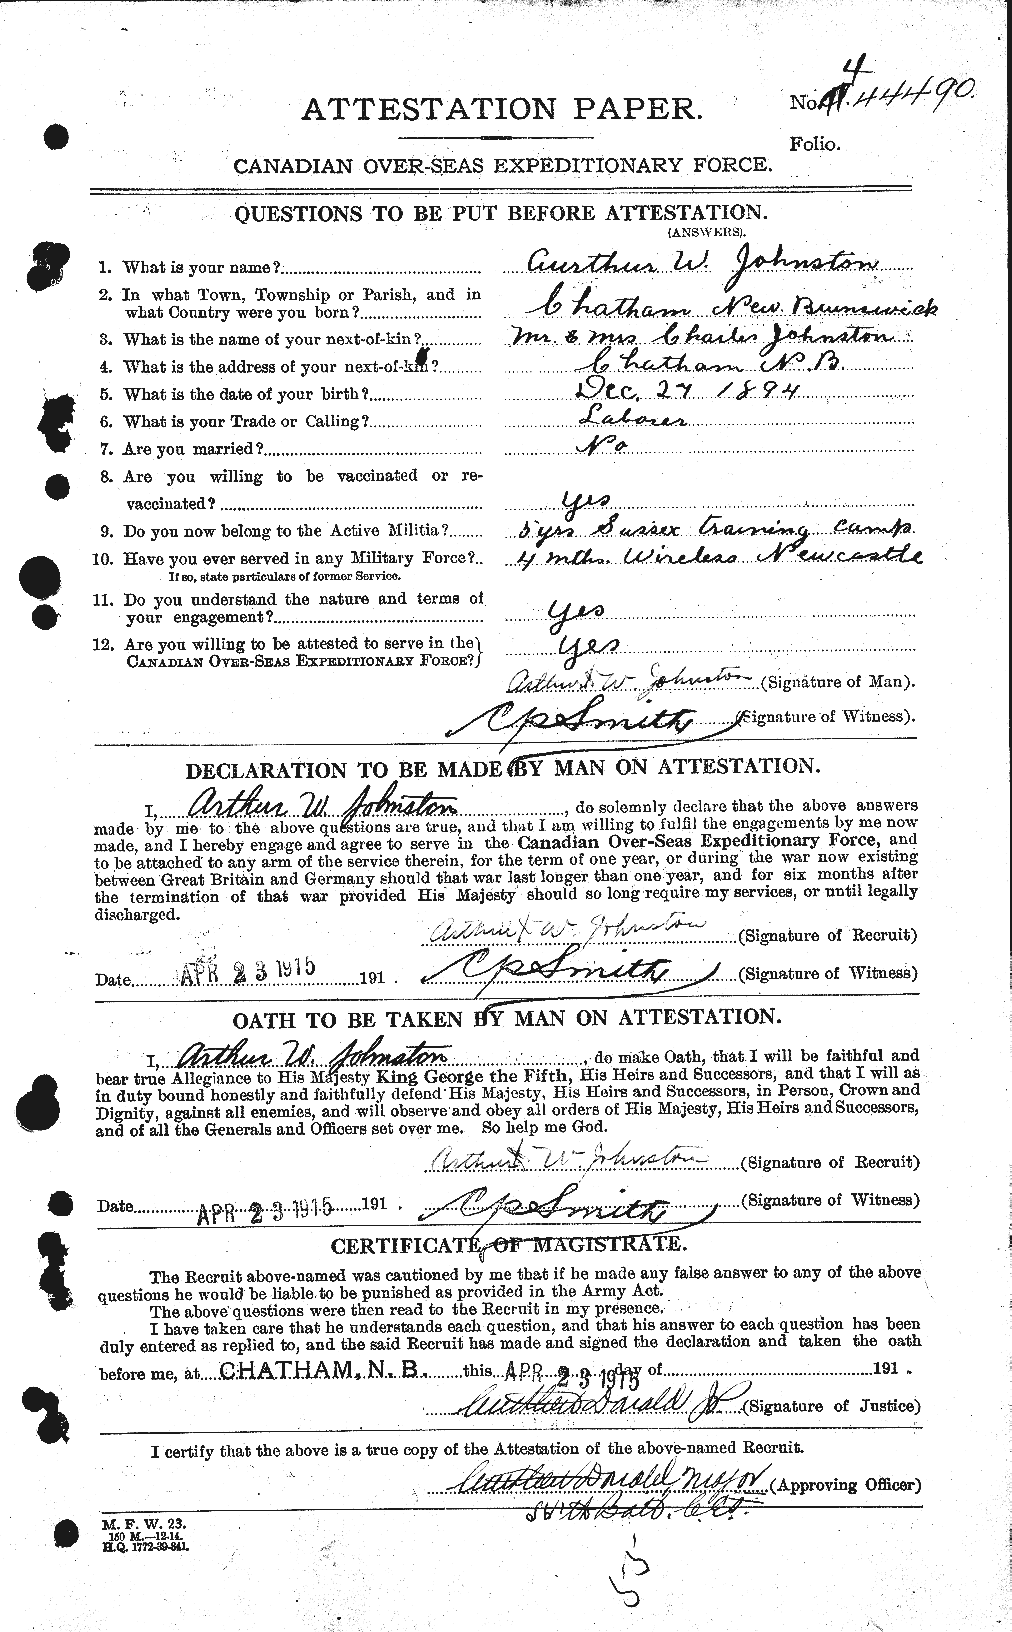 Personnel Records of the First World War - CEF 421055a